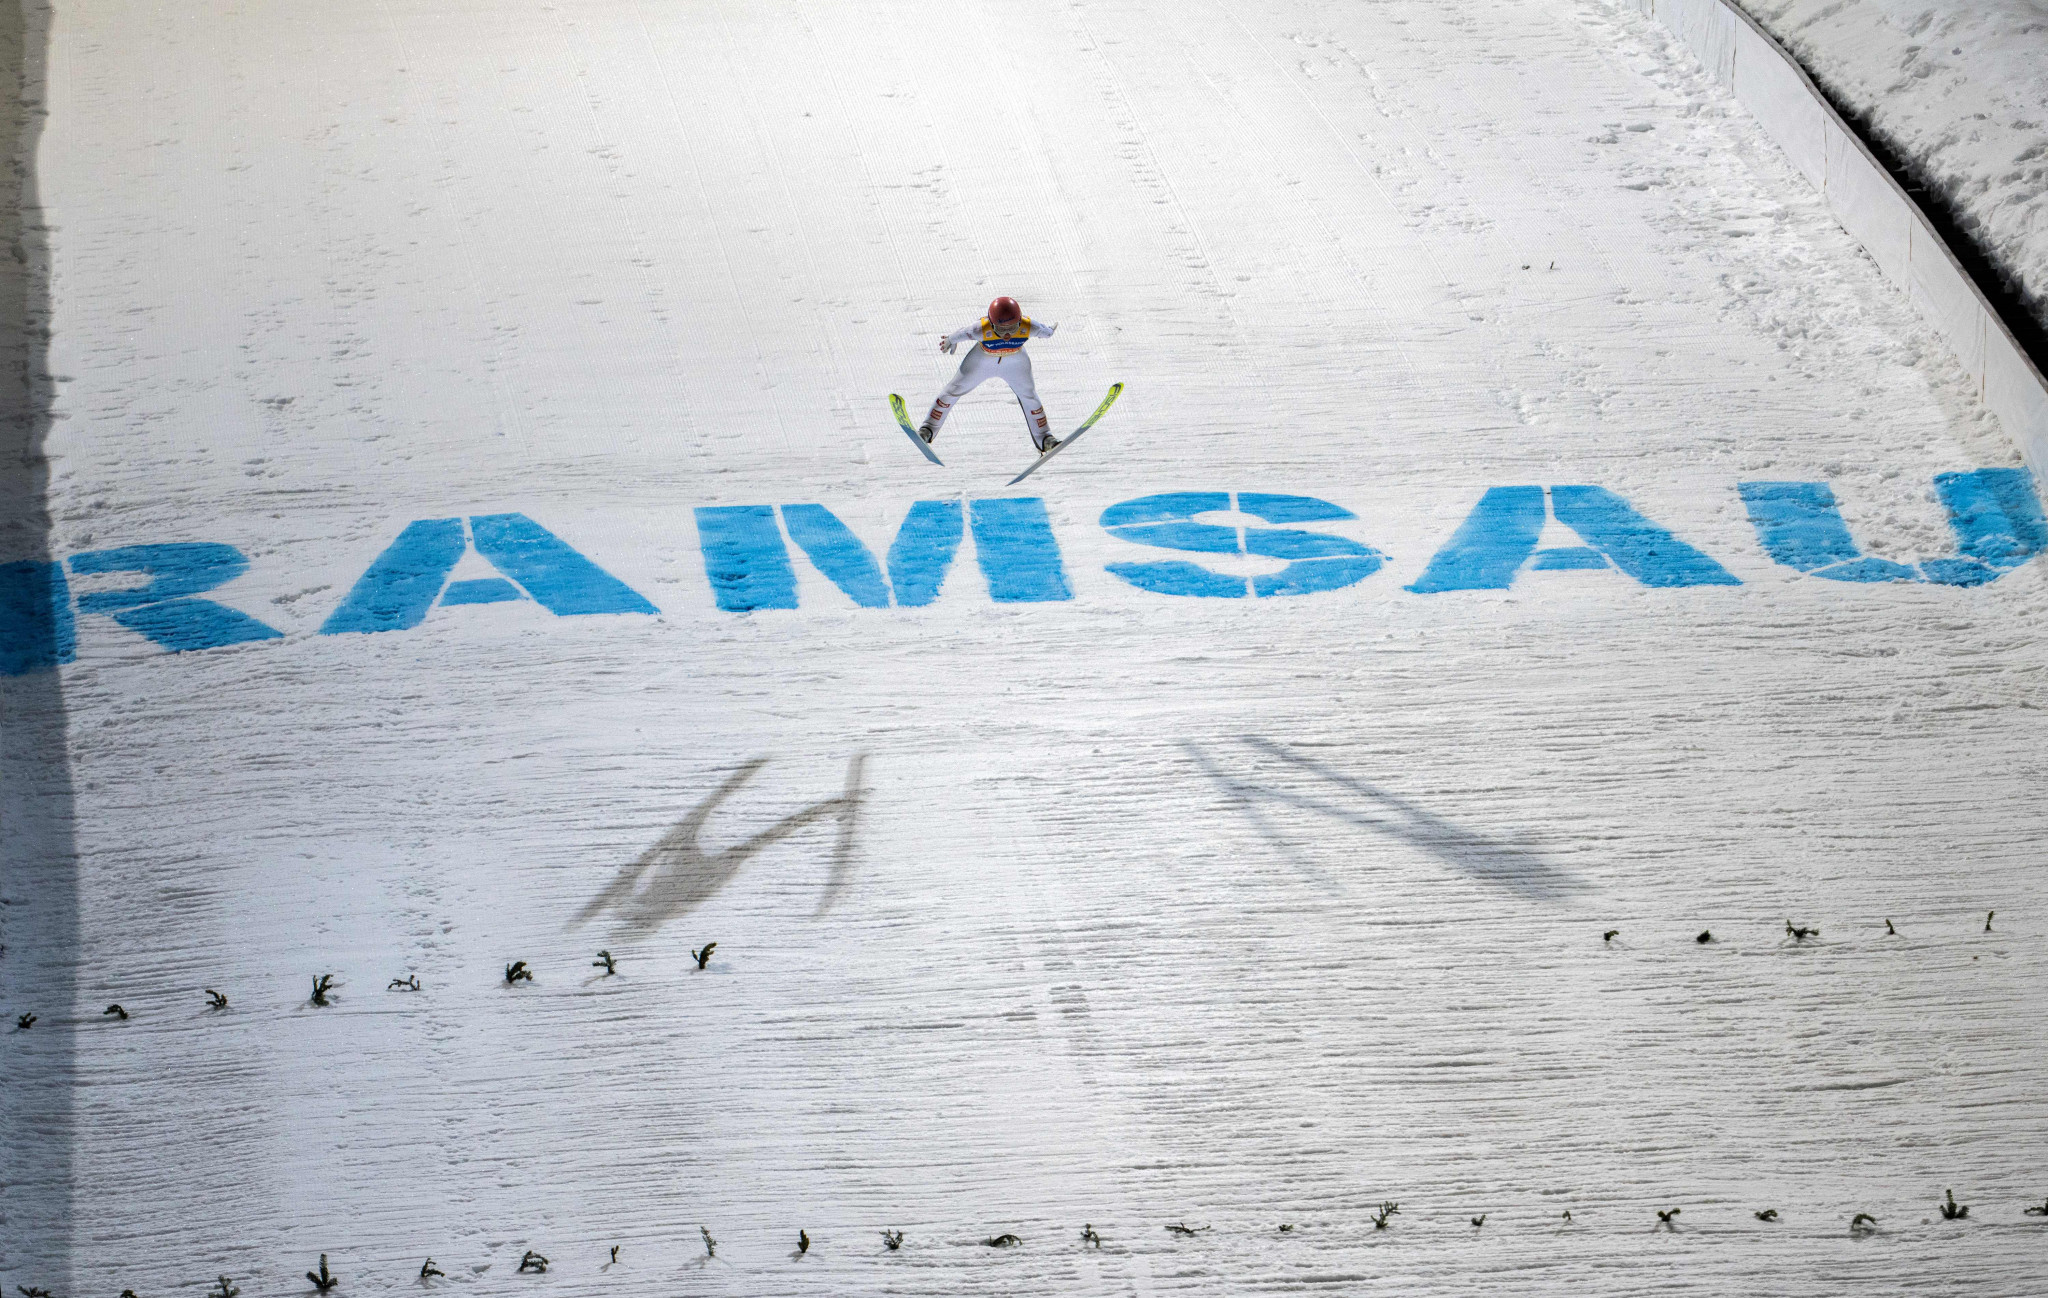 Kramer extends her lead in FIS Ski Jumping World Cup with gold in Ramsau